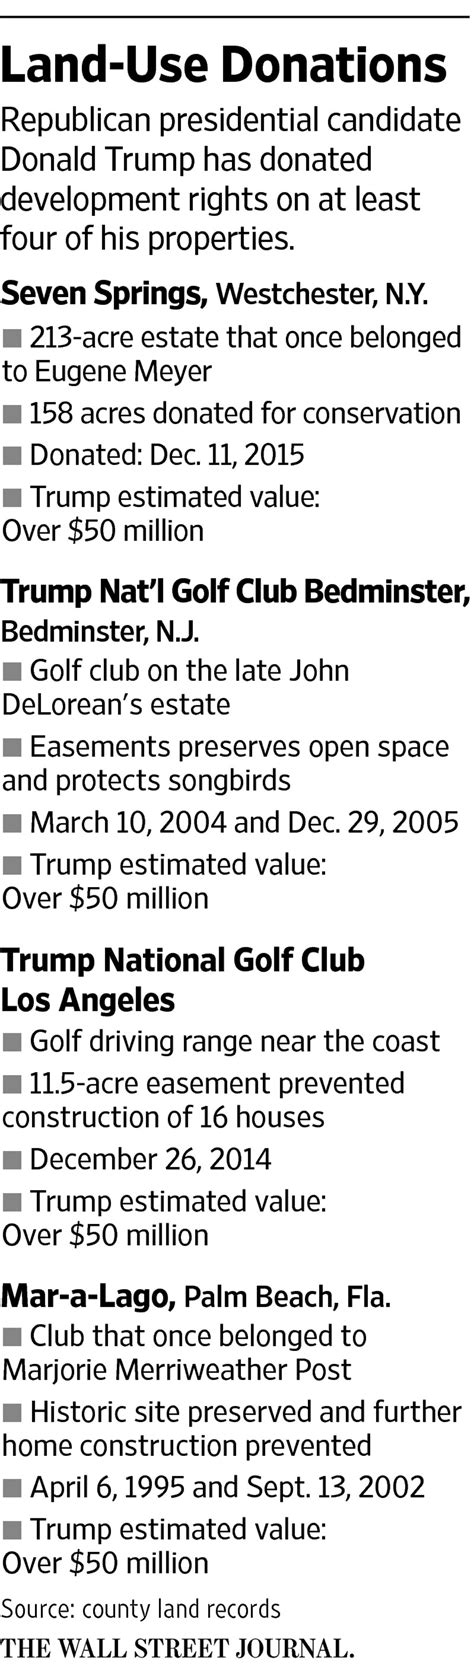 Donald Trumps Donations Put Him In Line For Conservation Tax Breaks Wsj